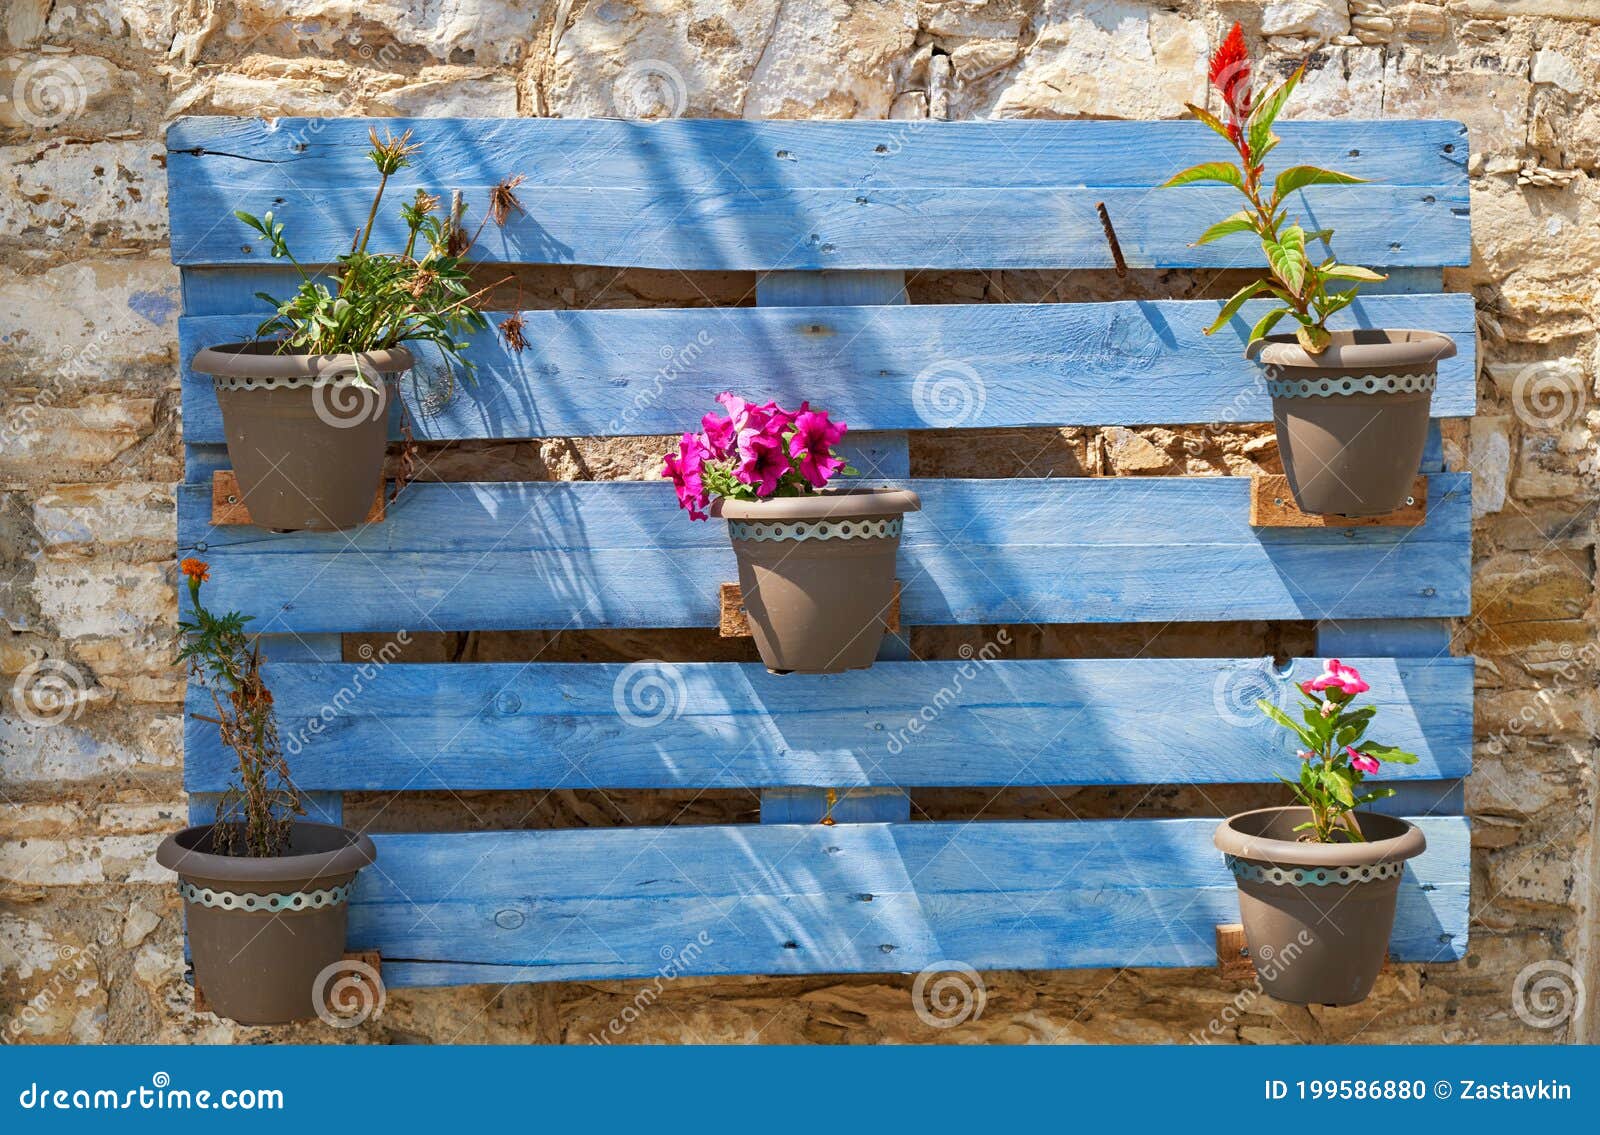 The Wood Wall Decoration with Flower Pots. Cyprus Stock Photo - Image of  decorative, ornamental: 199586880